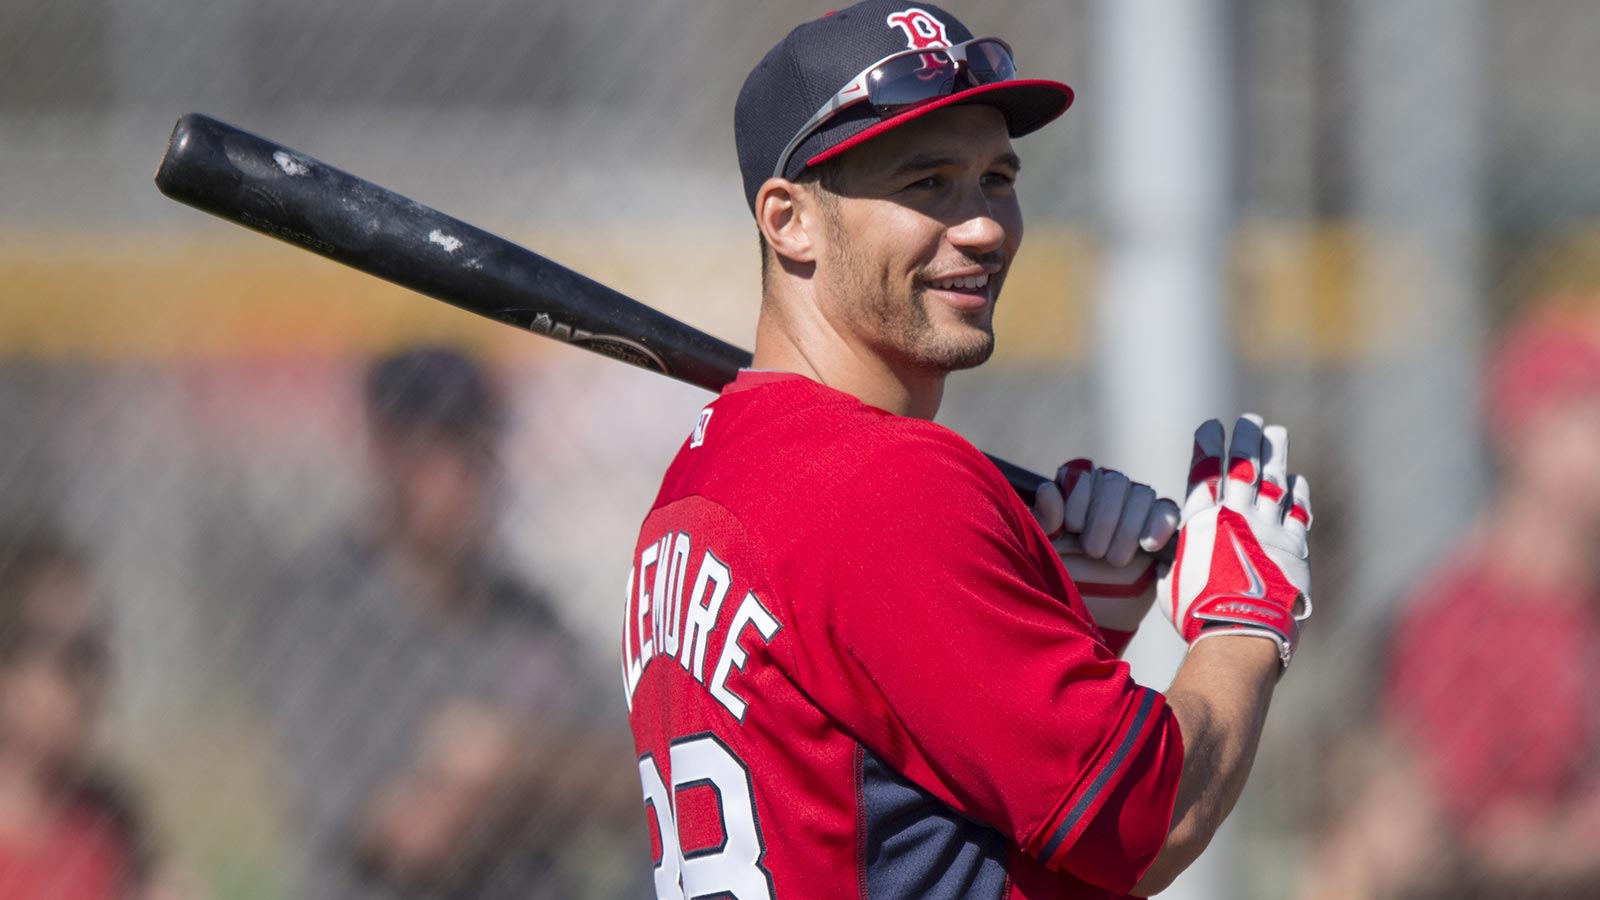 Boston Red Sox Outfielder Grady Sizemore Plays First Game